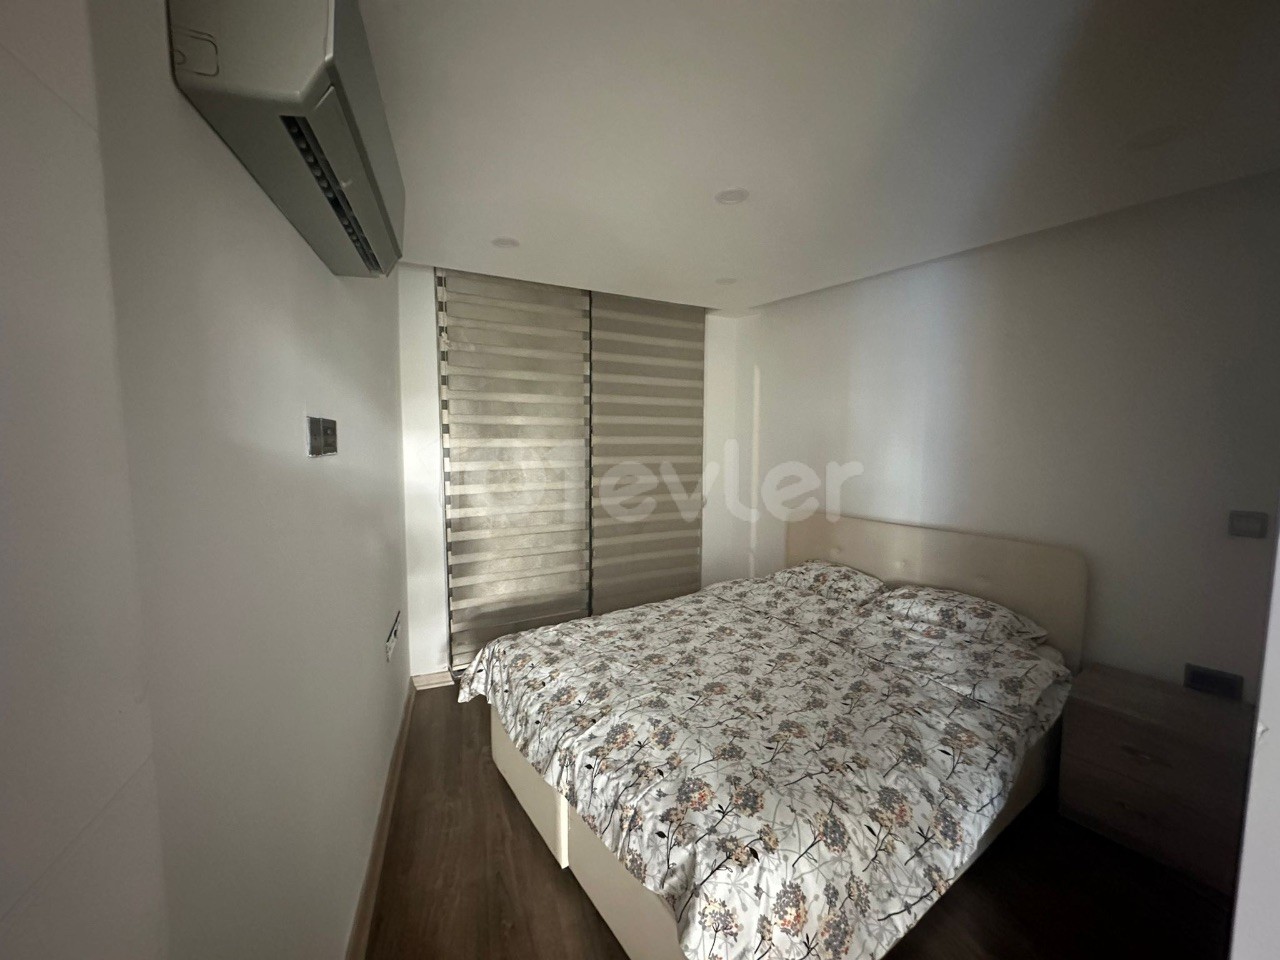 Kyrenia center 2+1 flat for rent with shared pool